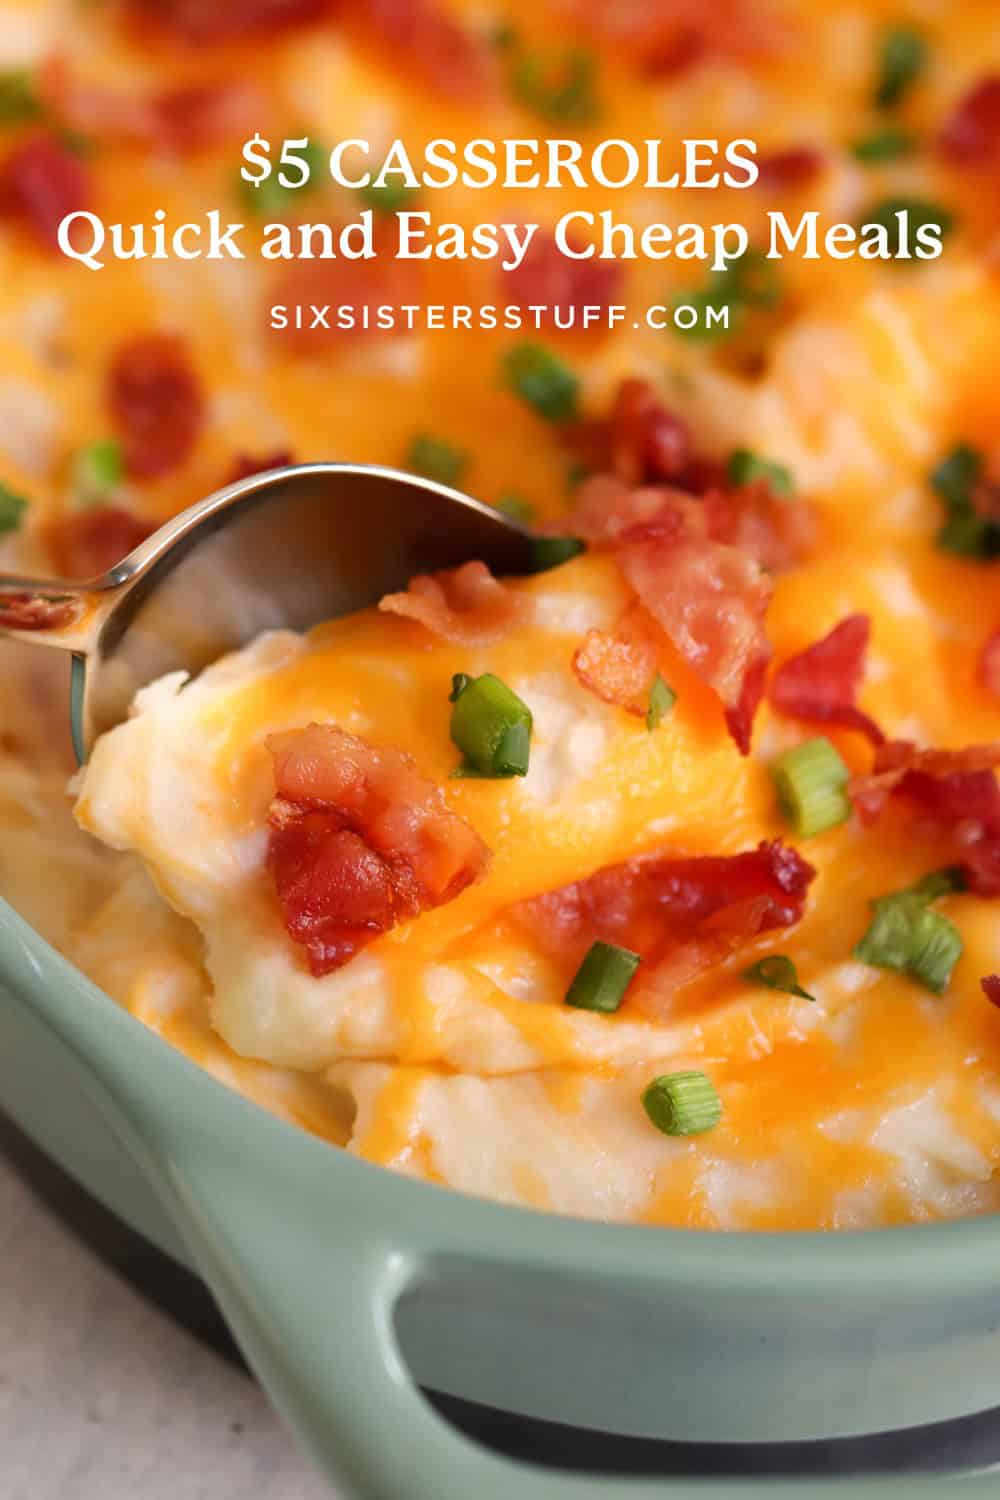 $5 CASSEROLES – Quick and Easy Cheap Meals!